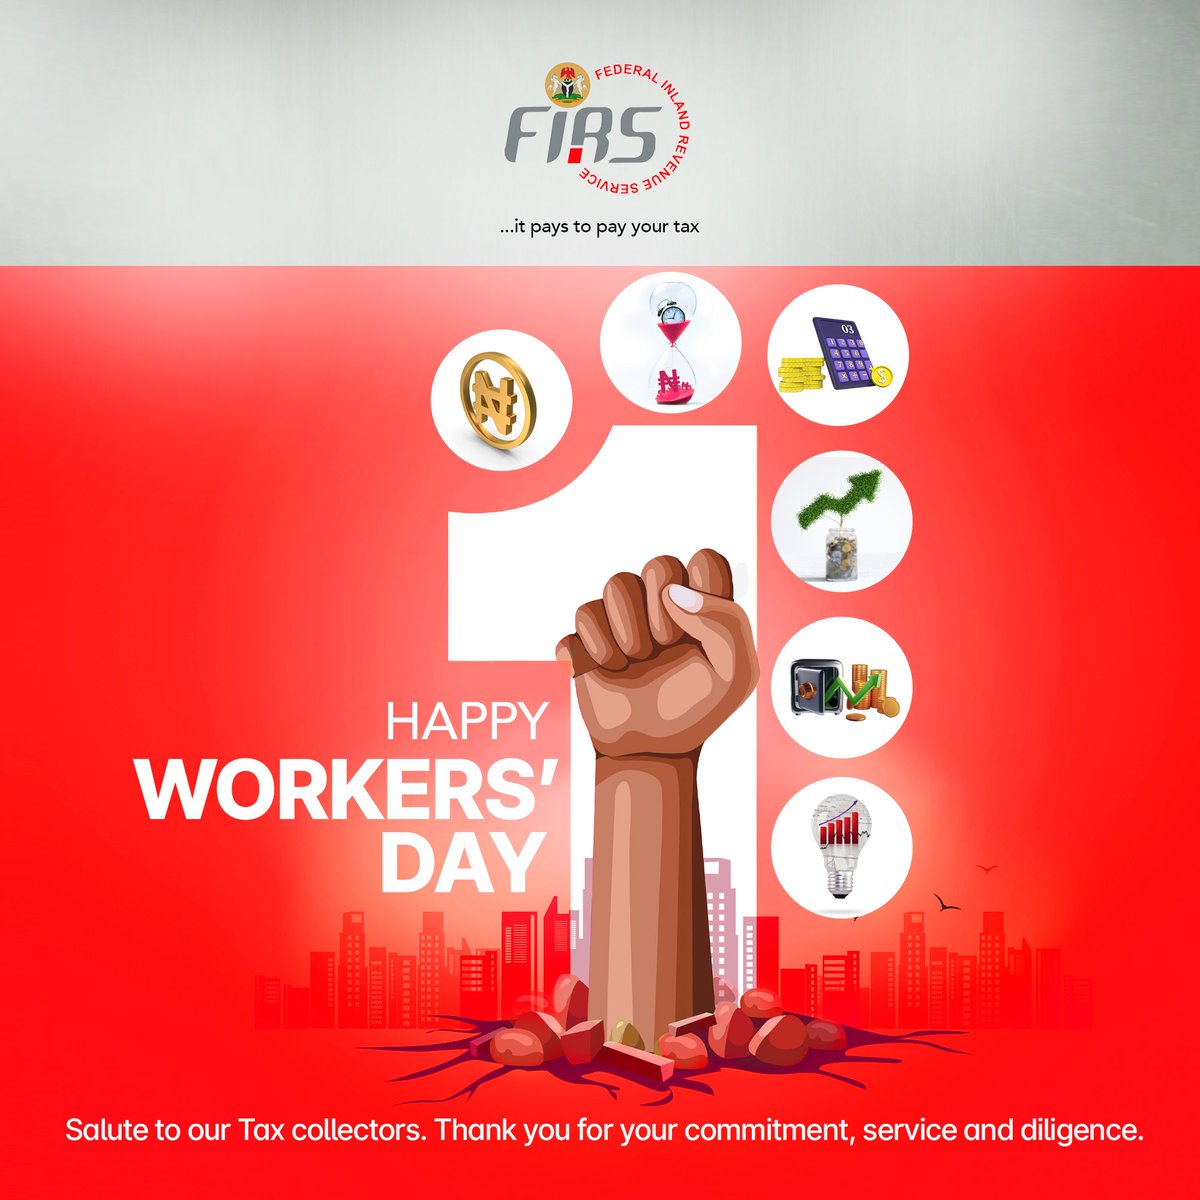 A Message of Appreciation and Commitment on Workers' Day As we celebrate Workers' Day, I extend my heartfelt appreciation to each and every one of you for your dedication and tireless efforts towards the success of the Federal Inland Revenue Service (FIRS). Your daily